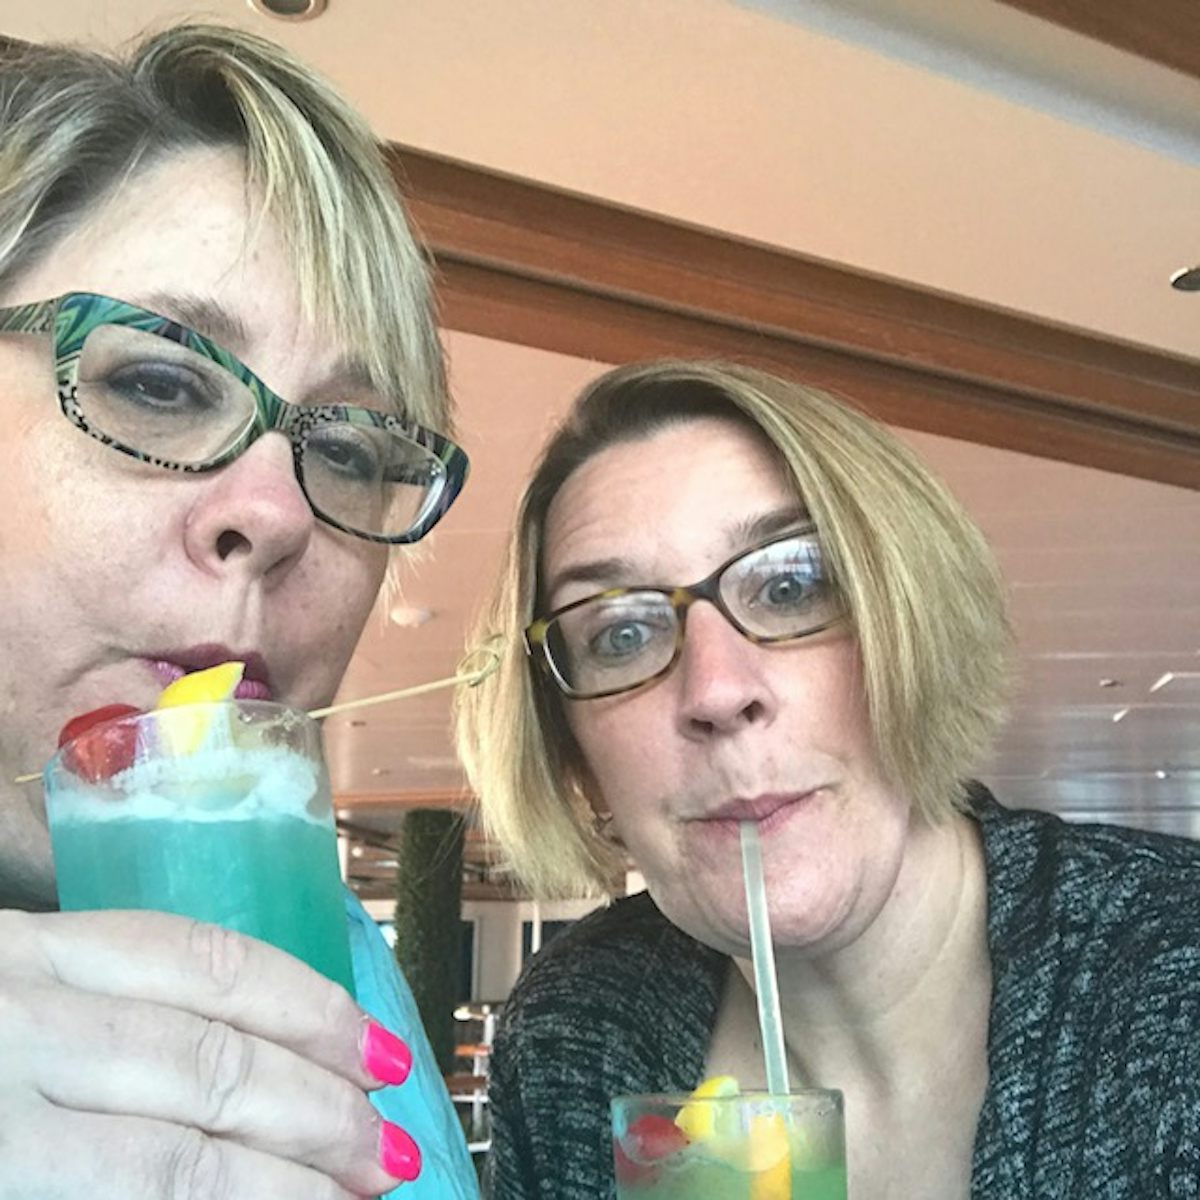 My friend and I having another frozen drink!